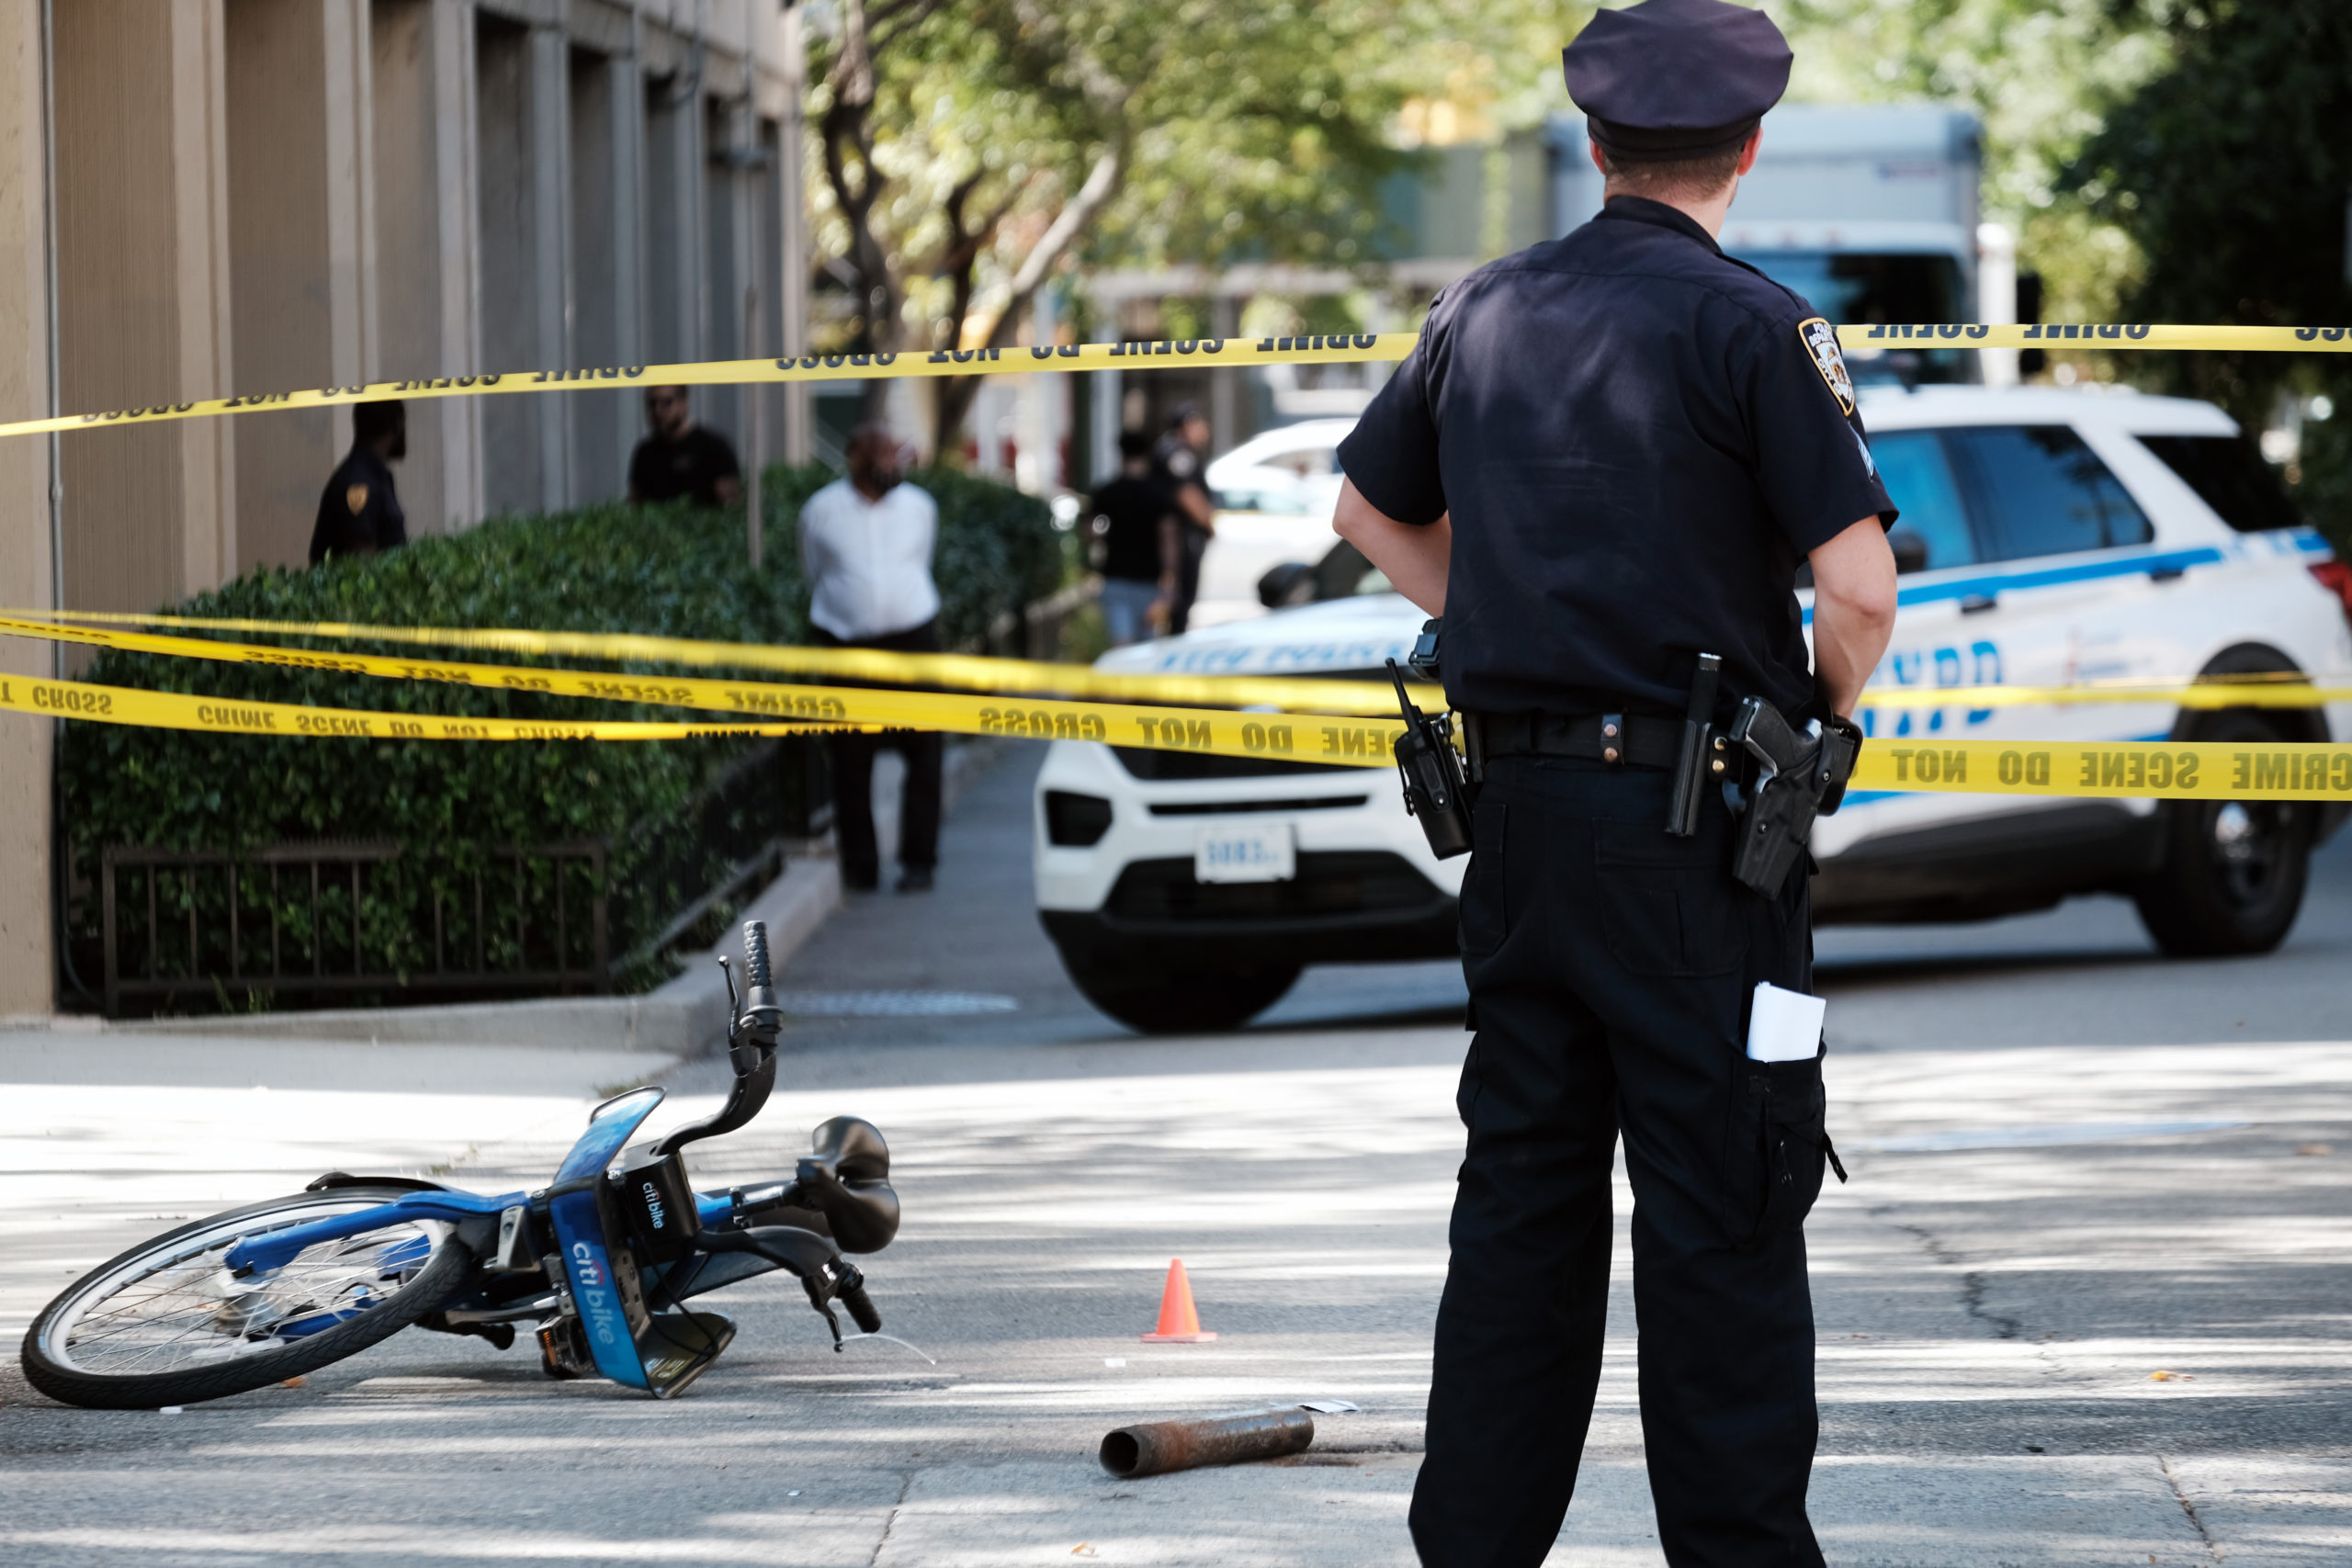 NEW YORK, NEW YORK - SEPTEMBER 01: A Citi Bike sits at the scene of a shooting in Alphabet City in lower Manhattan on September 01, 2022 in New York City. The afternoon shooting was the second one in the day in Manhattan after a woman was shot and killed in the early morning hours near Union Square. (Photo by Spencer Platt/Getty Images)